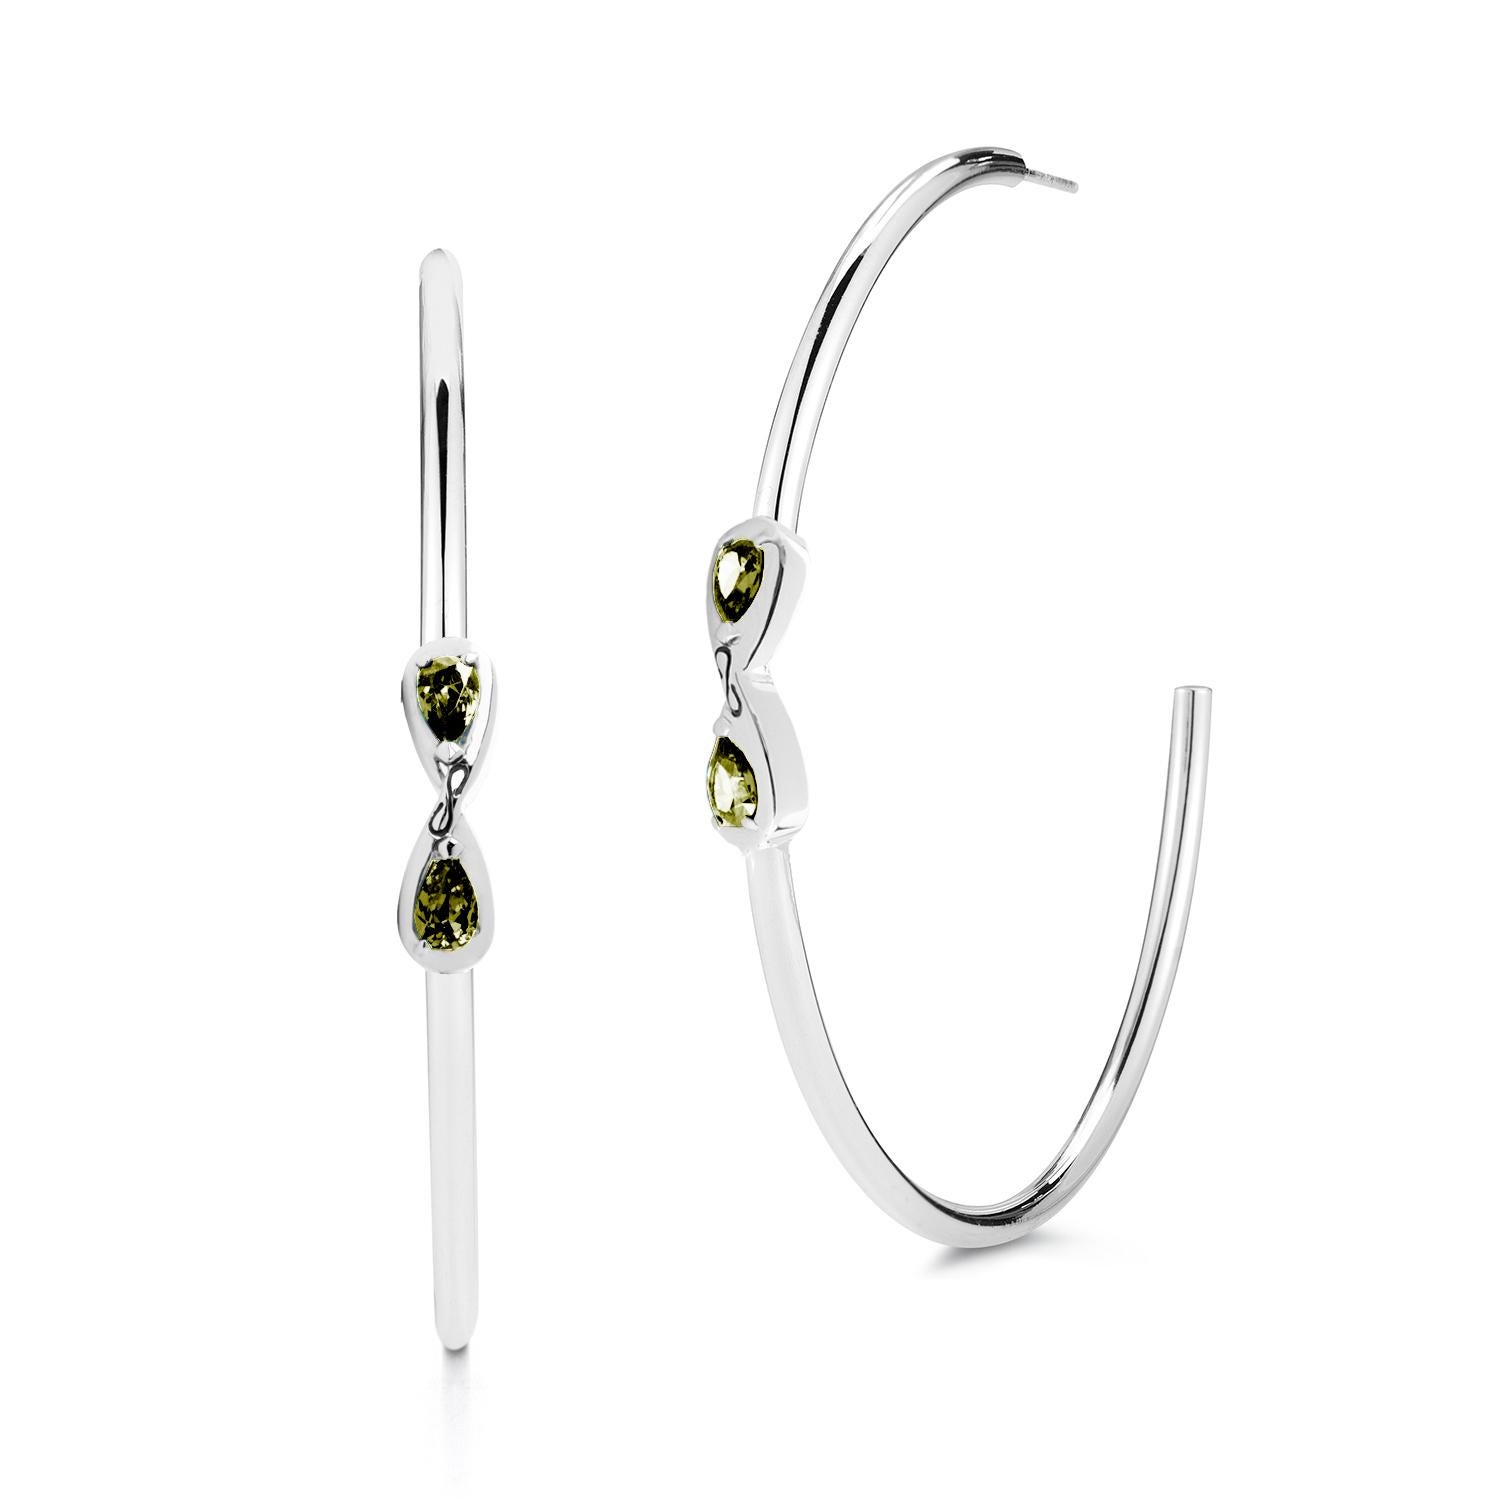 Designed in NYC

.925 Sterling Silver 6 x 4 mm White Topaz Large Infinity With Stone Open Hoops. When it comes to self-expression, the style possibilities are endless. Large Infinity with stone open hoops:

Sterling silver 
High-polish